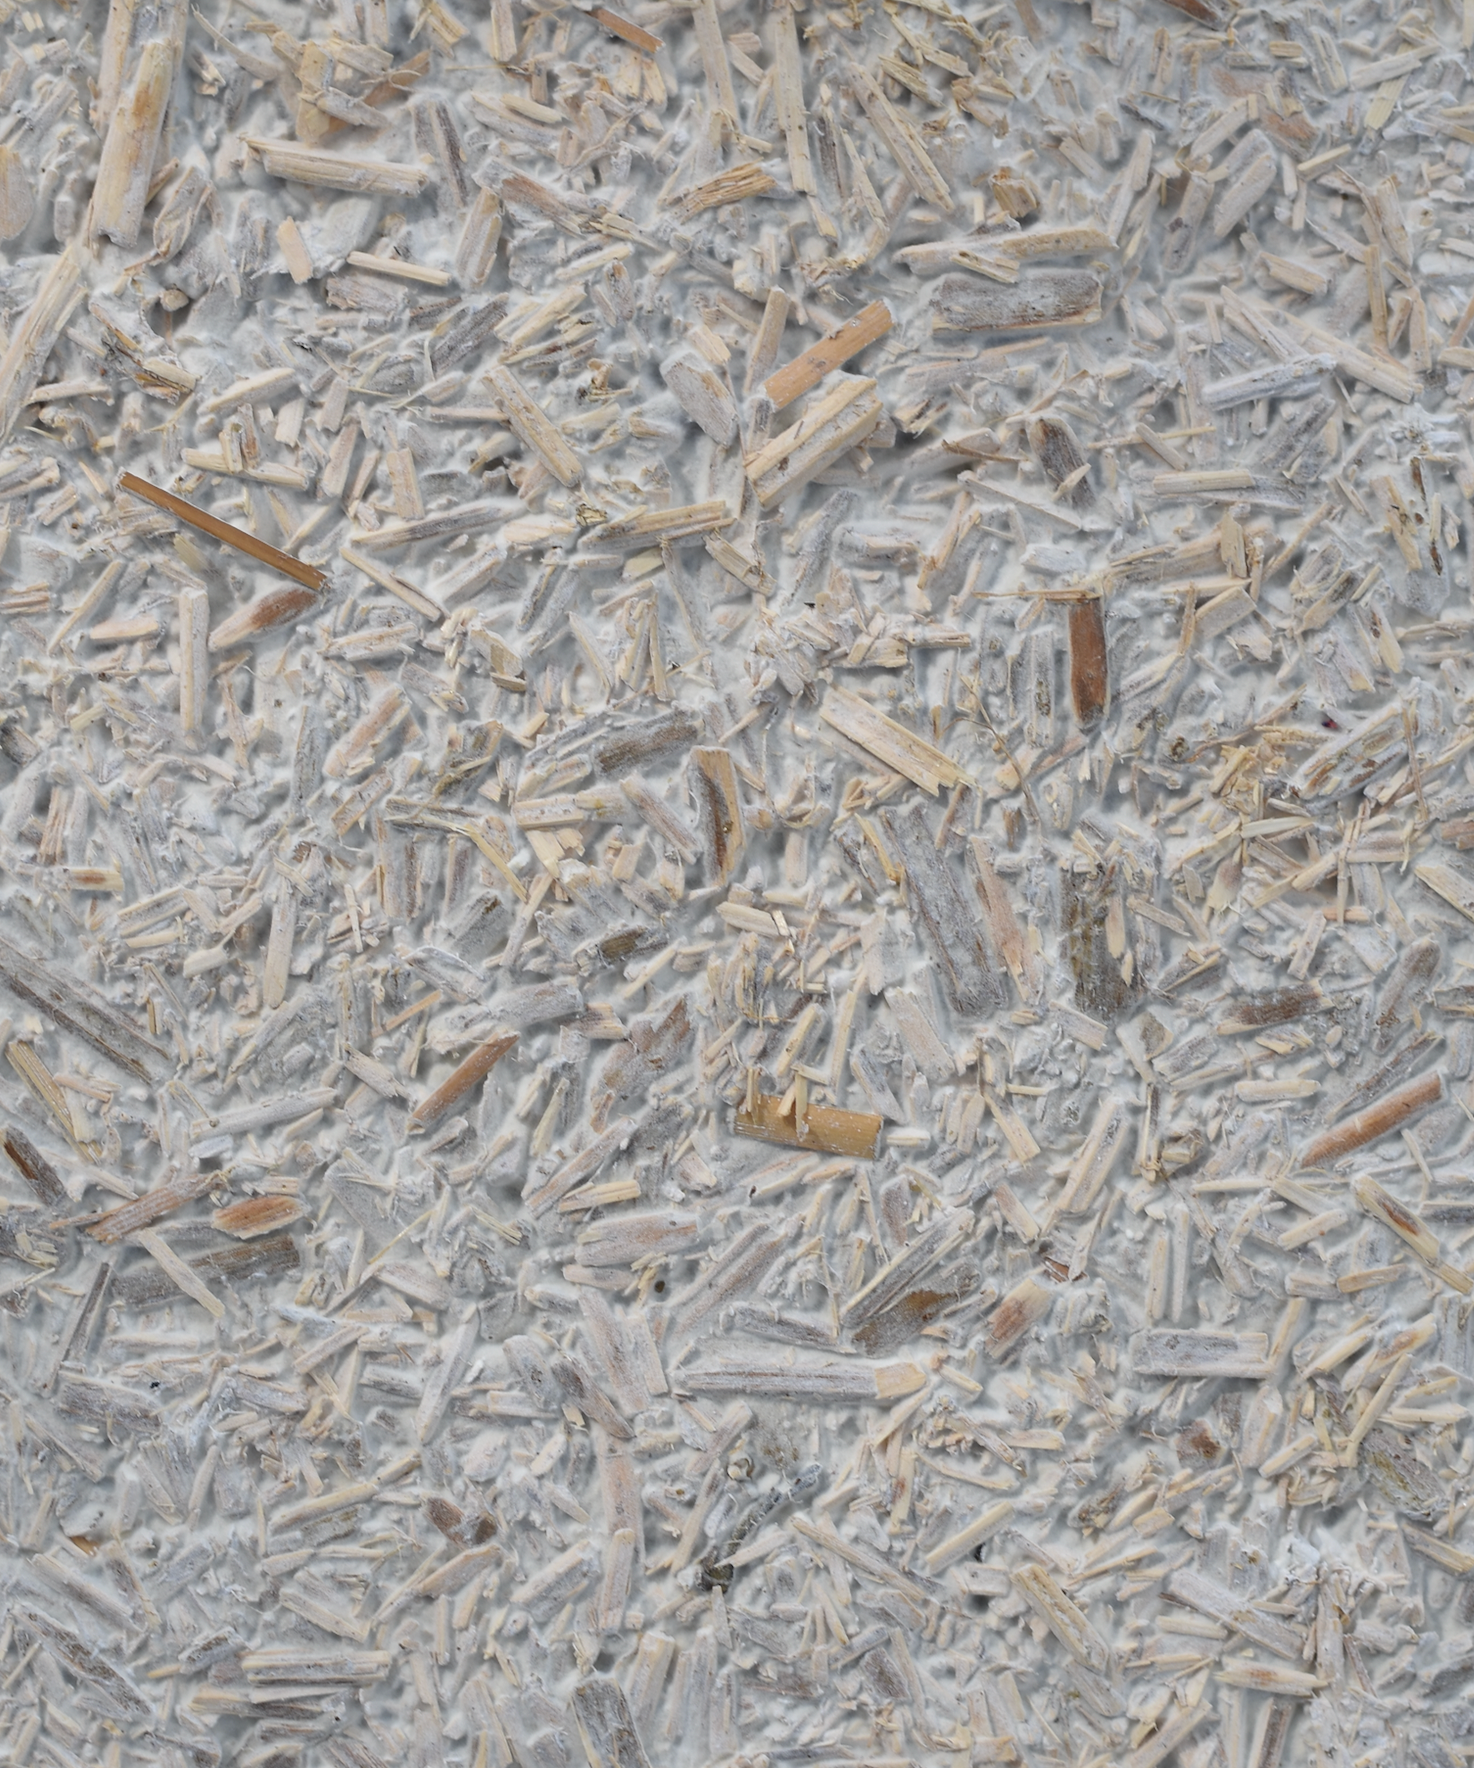 A close-up image revealing the rough texture of an eco mycelium wall covering panel. This panel exemplifies the essence of bio-based and sustainable building materials, reflecting an eco design approach. Its rough texture adds a unique touch to eco friendly interior design while being biodegradable and contributing to sustainability in design. The panel's modular design offers versatility, making it a practical choice for various applications